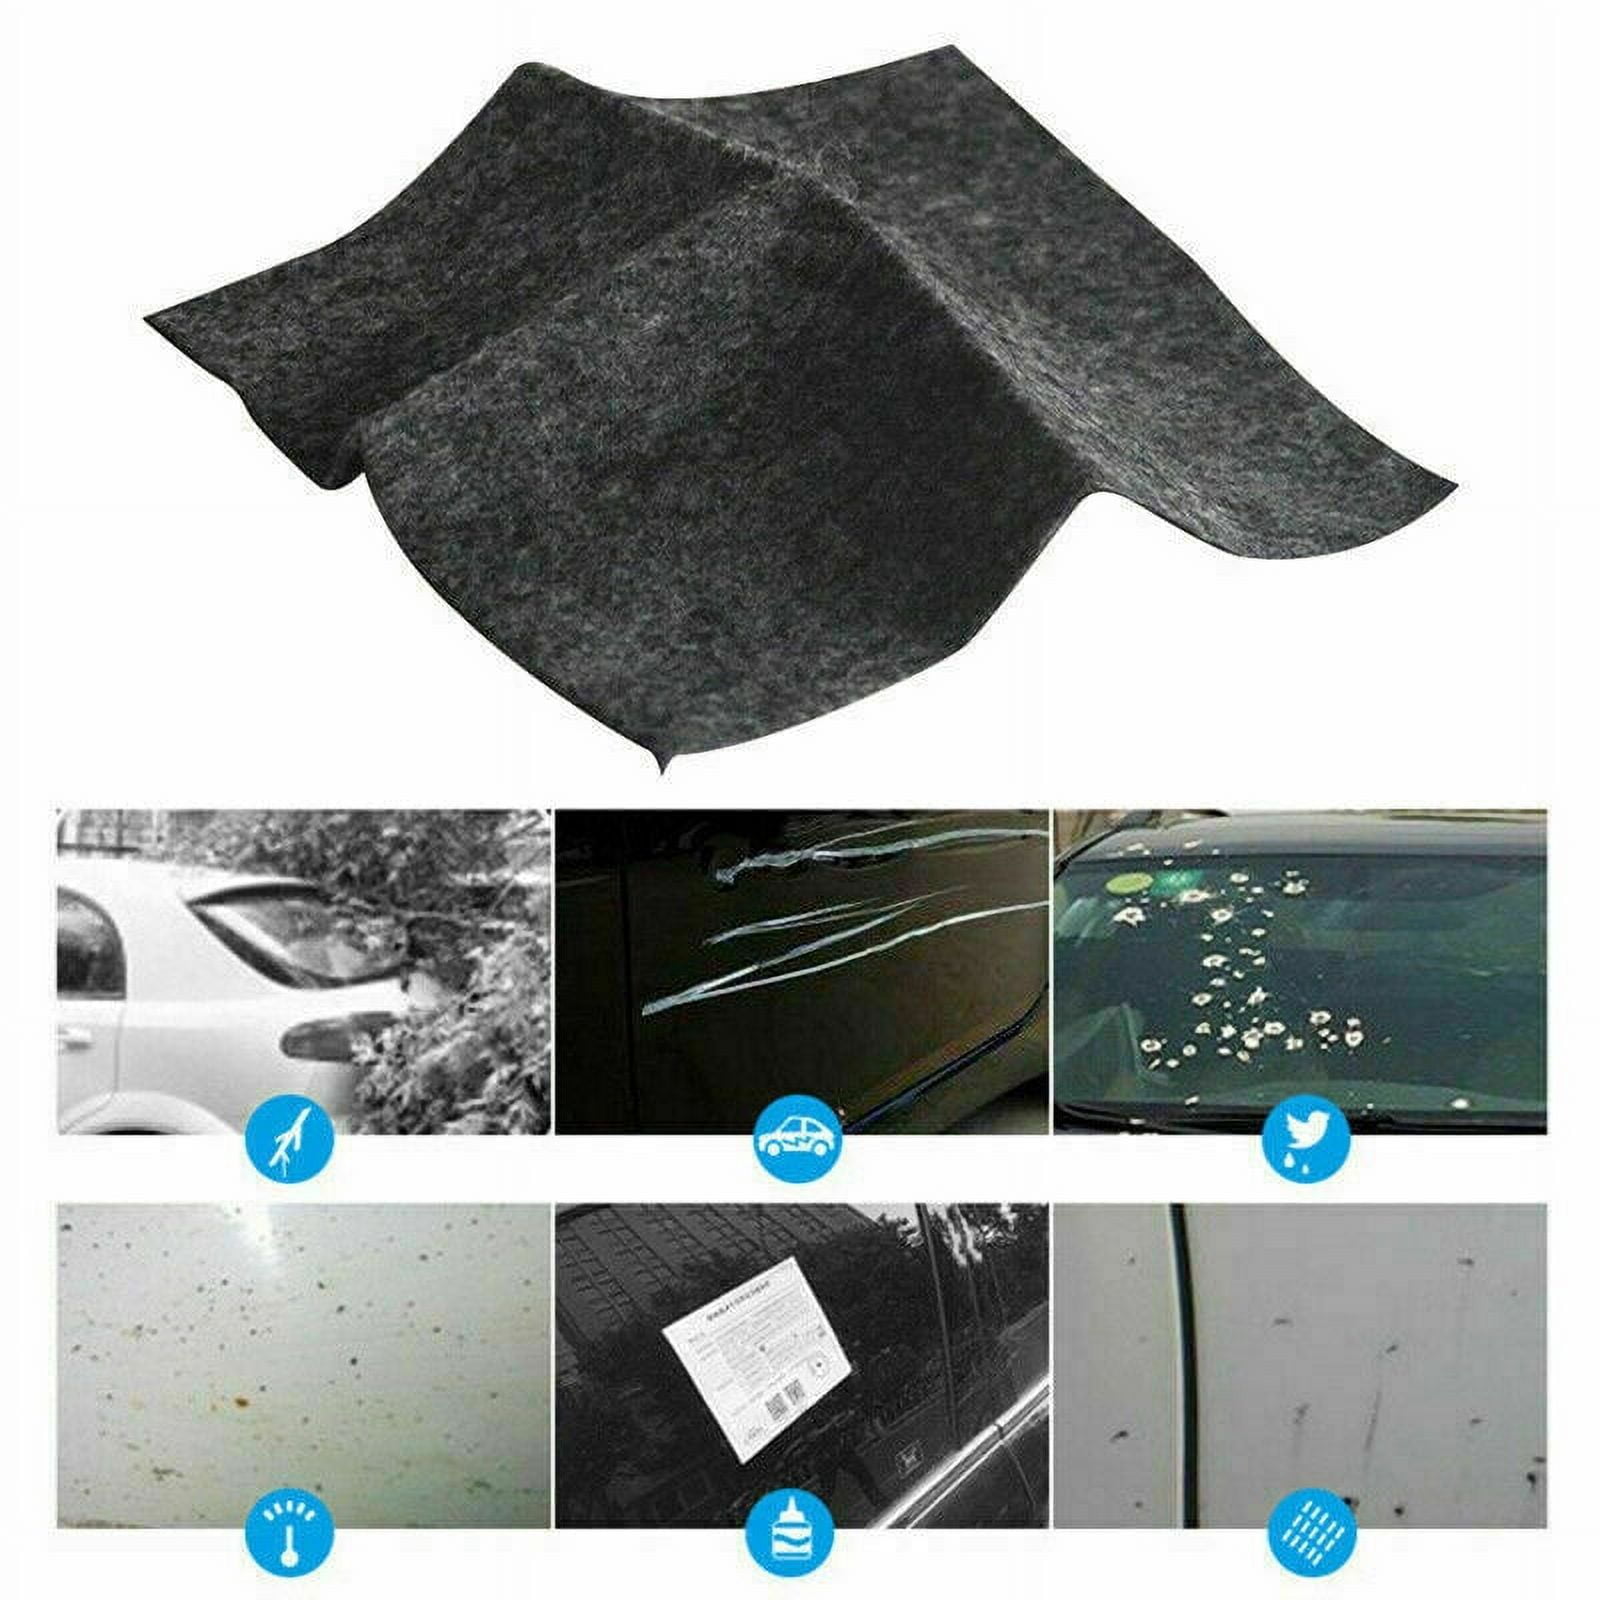  18 pcs Nano Sparkle Cloth for Car Scratches,Car Scratch Repair  Cloth,Upgraded Nano Magic Car Scratch Remover Cloth,Scratch Repair  Cloth,Car Scratch Remover for All Kinds of Car Smooth Surfaces : Automotive